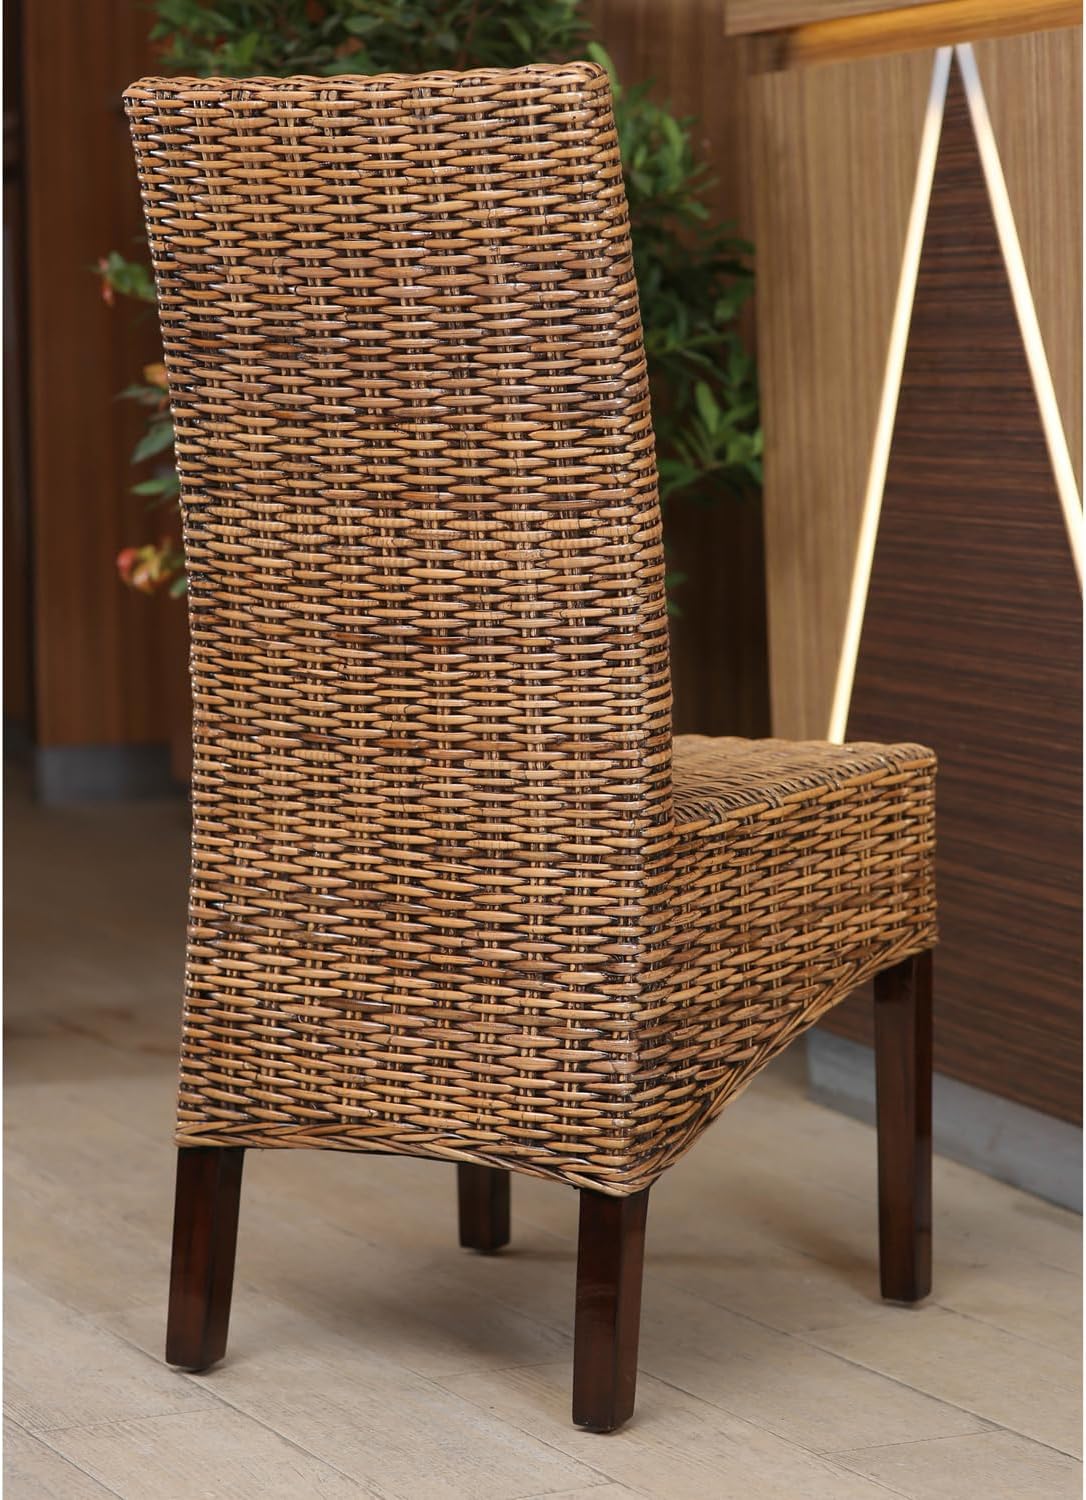 Java-Woven Rattan/Mahogany Dining Chair (set of two)